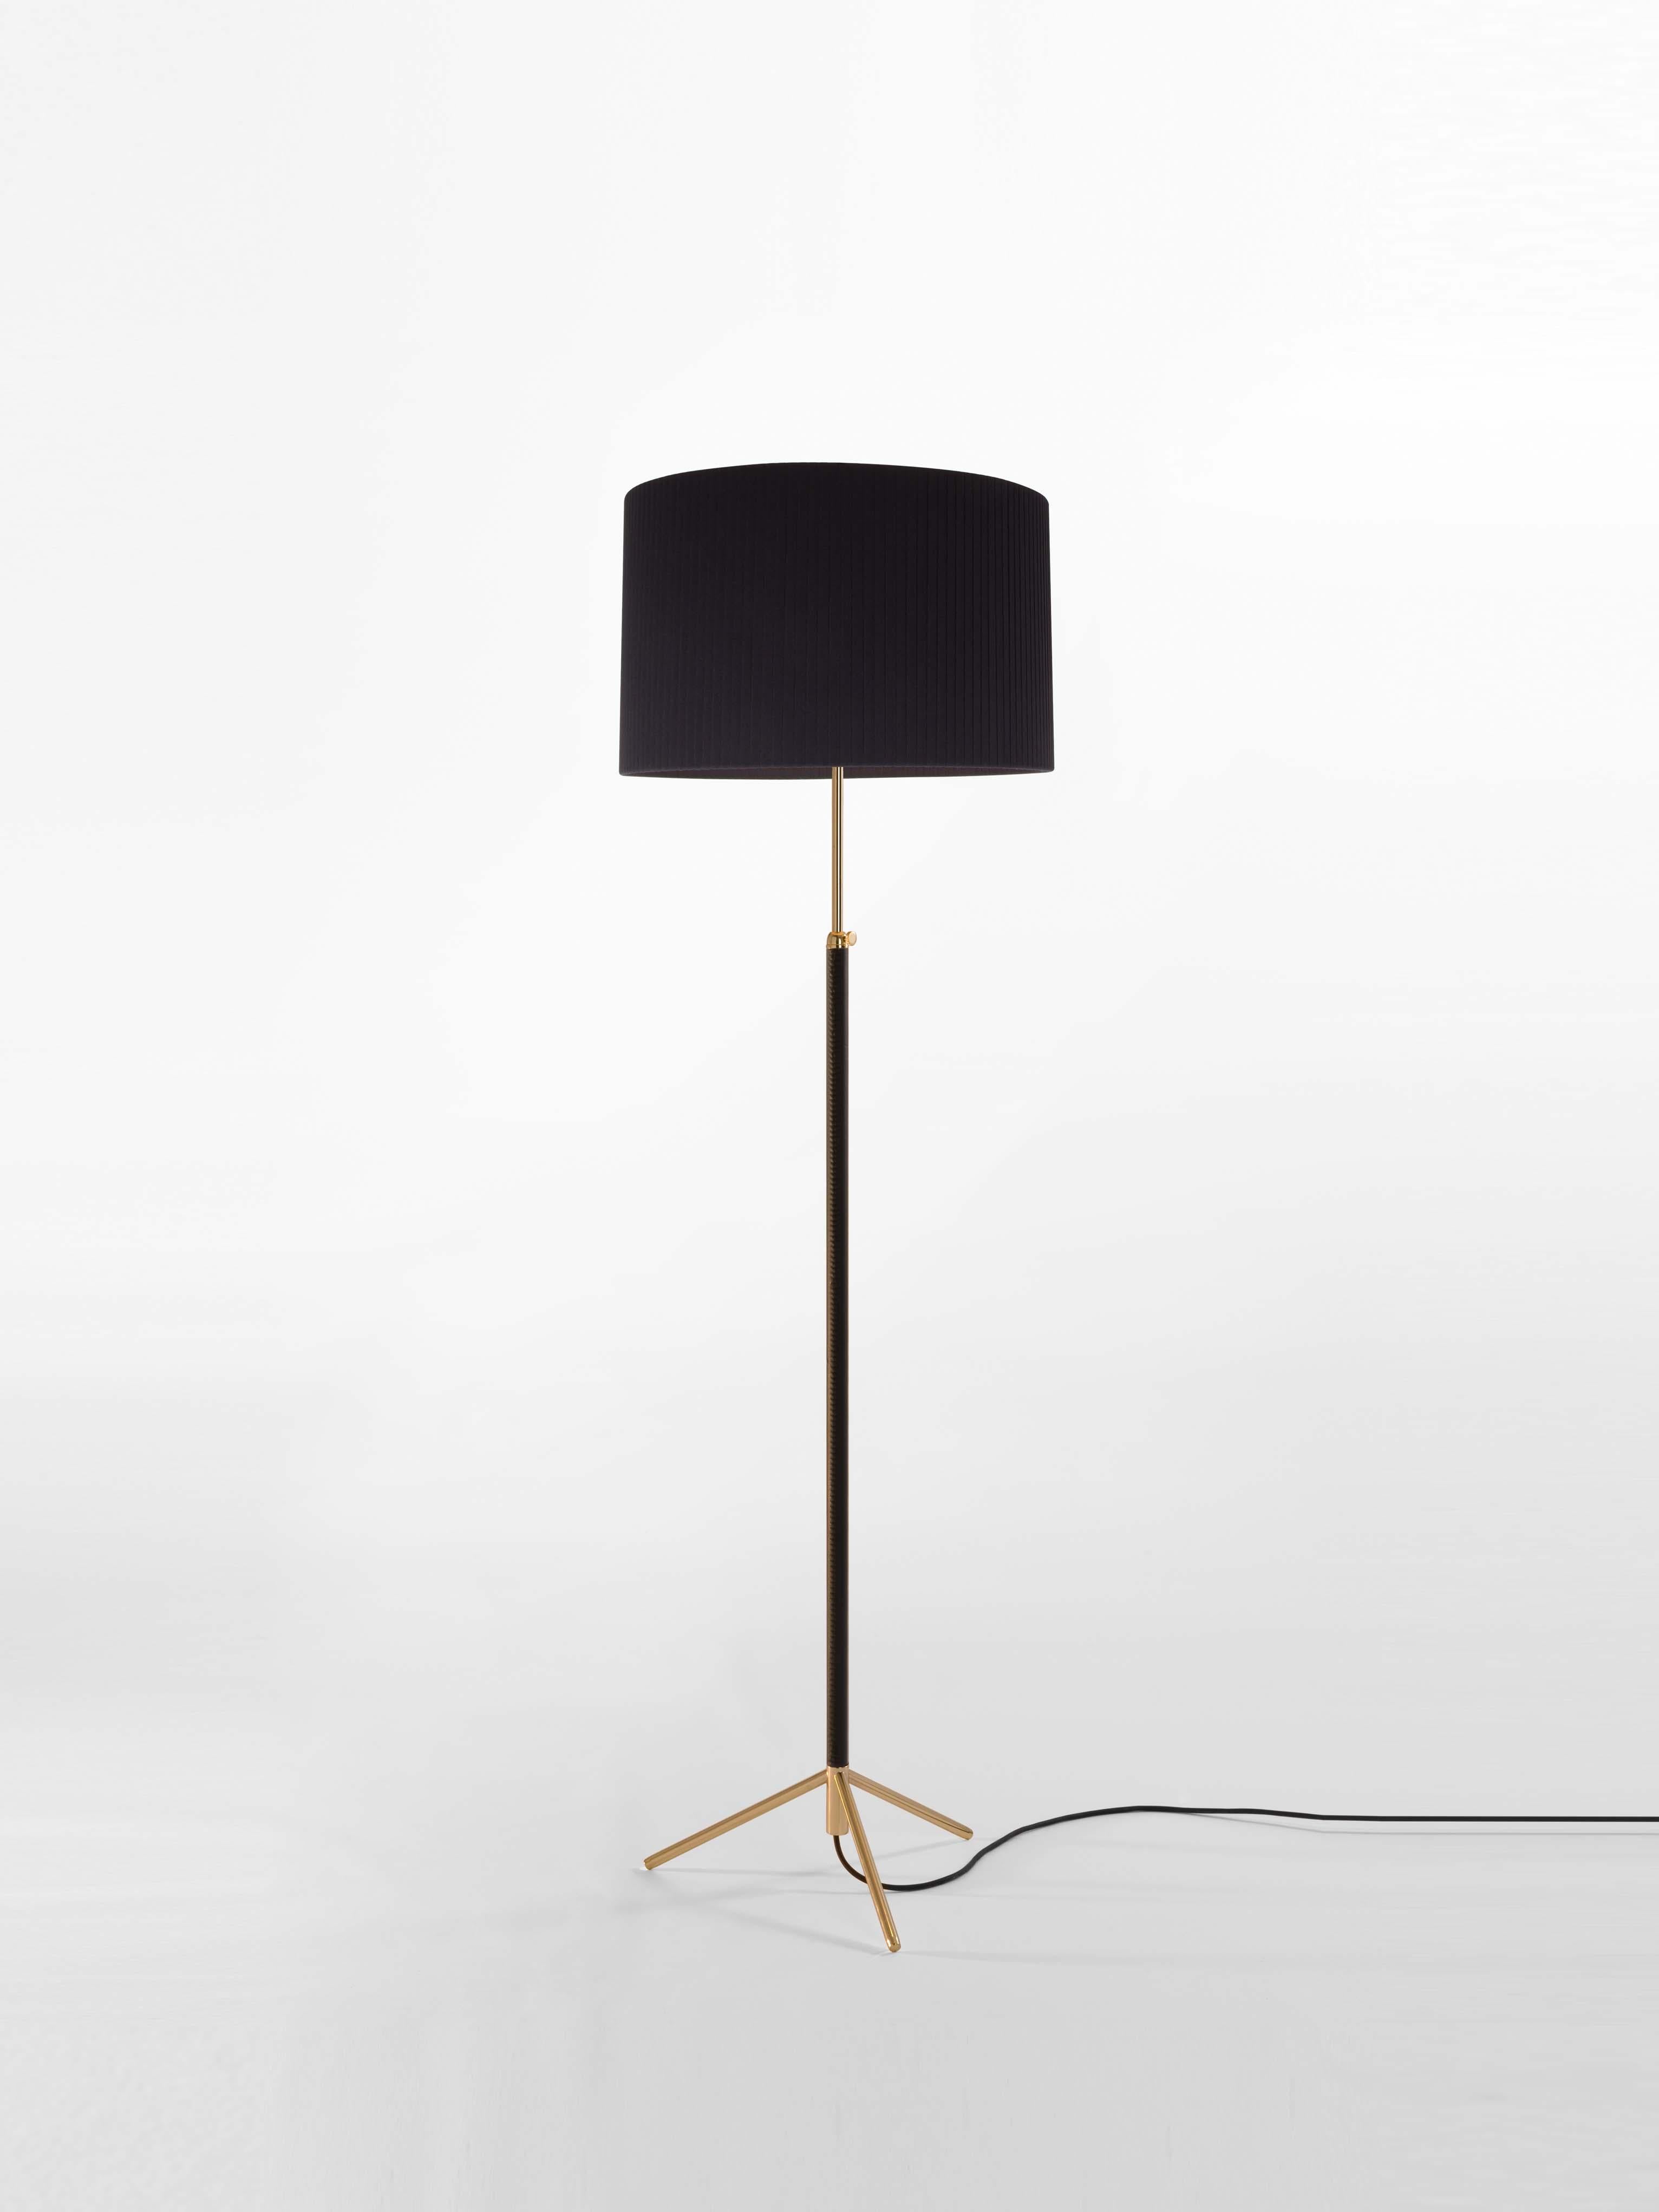 Black and brass pie de salón G2 floor lamp by Jaume Sans
Dimensions: D 45 x H 120-160 cm
Materials: Metal, leather, ribbon.
Available in chrome-plated or polished brass structure.
Available in other shade colors and sizes.

This slender